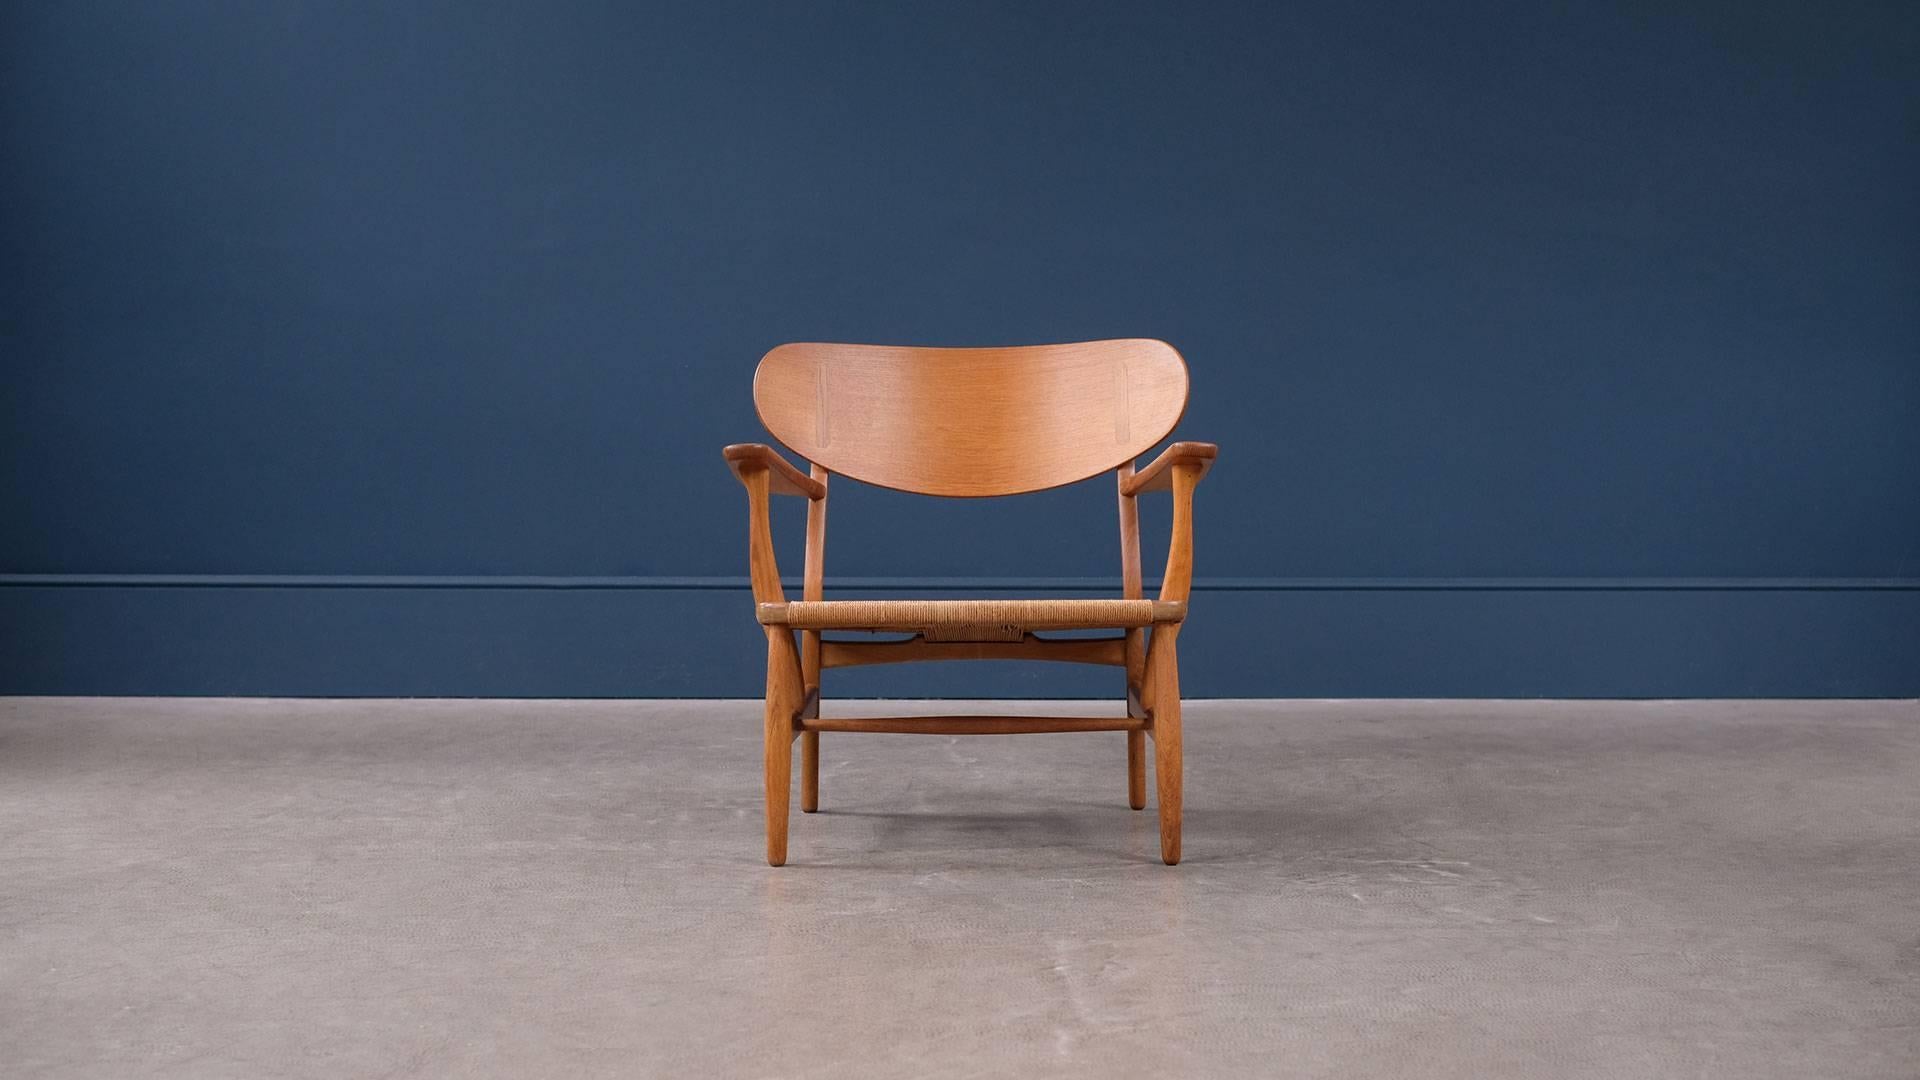 Original CH22 lounge chair in solid oak with papercord seat designed by Hans Wegner for Carl Hansen, Denmark. Amazing example of this beautiful lounge chair with very striking grain and superb exposed joint detail. Great piece.